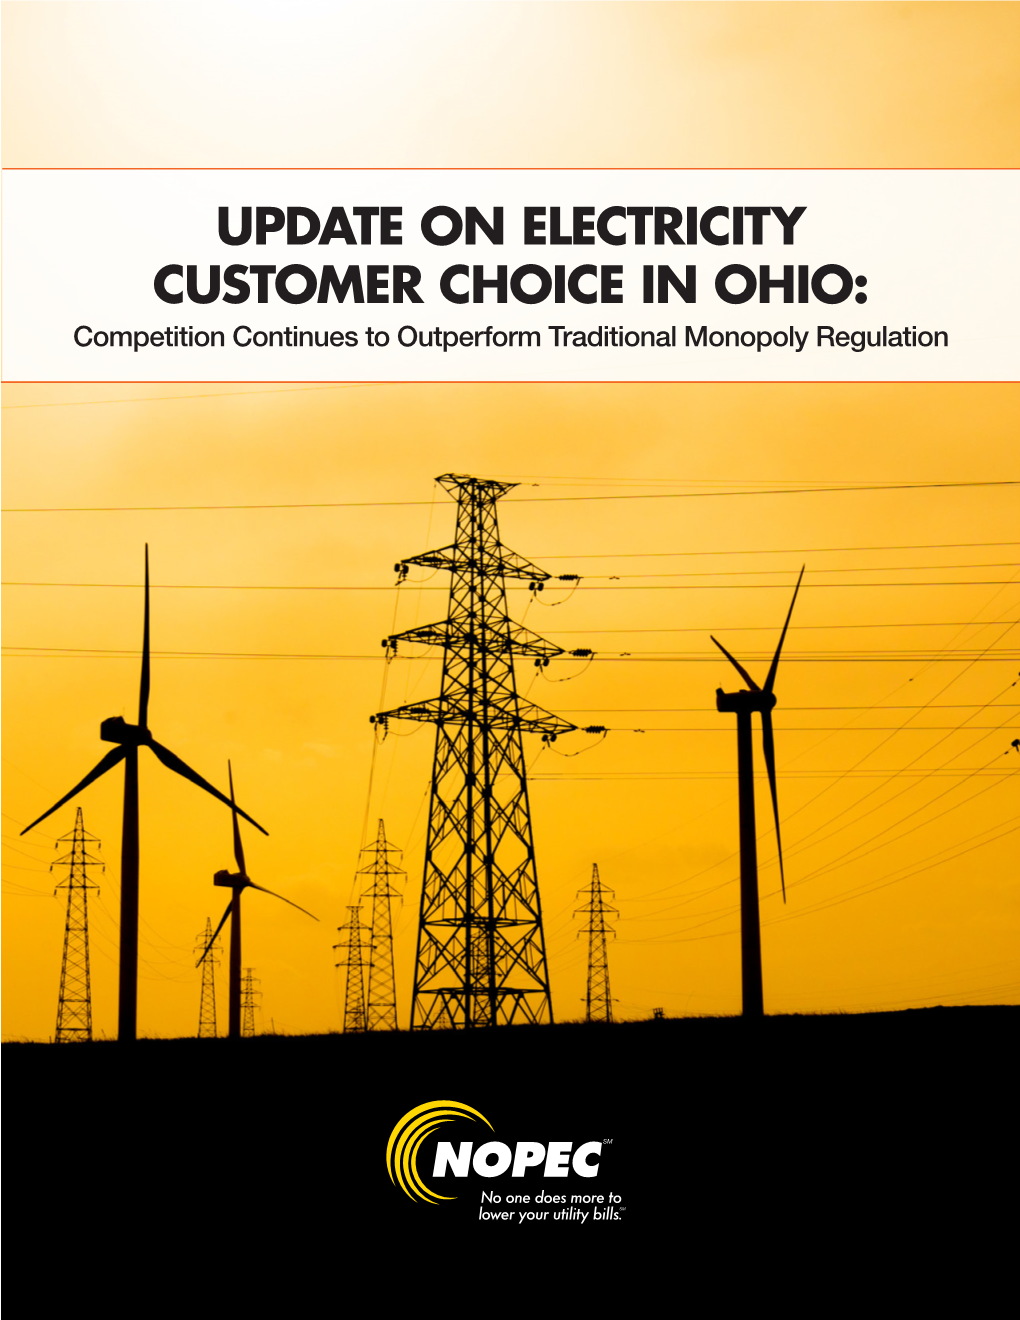 UPDATE on ELECTRICITY CUSTOMER CHOICE in OHIO: Competition Continues to Outperform Traditional Monopoly Regulation